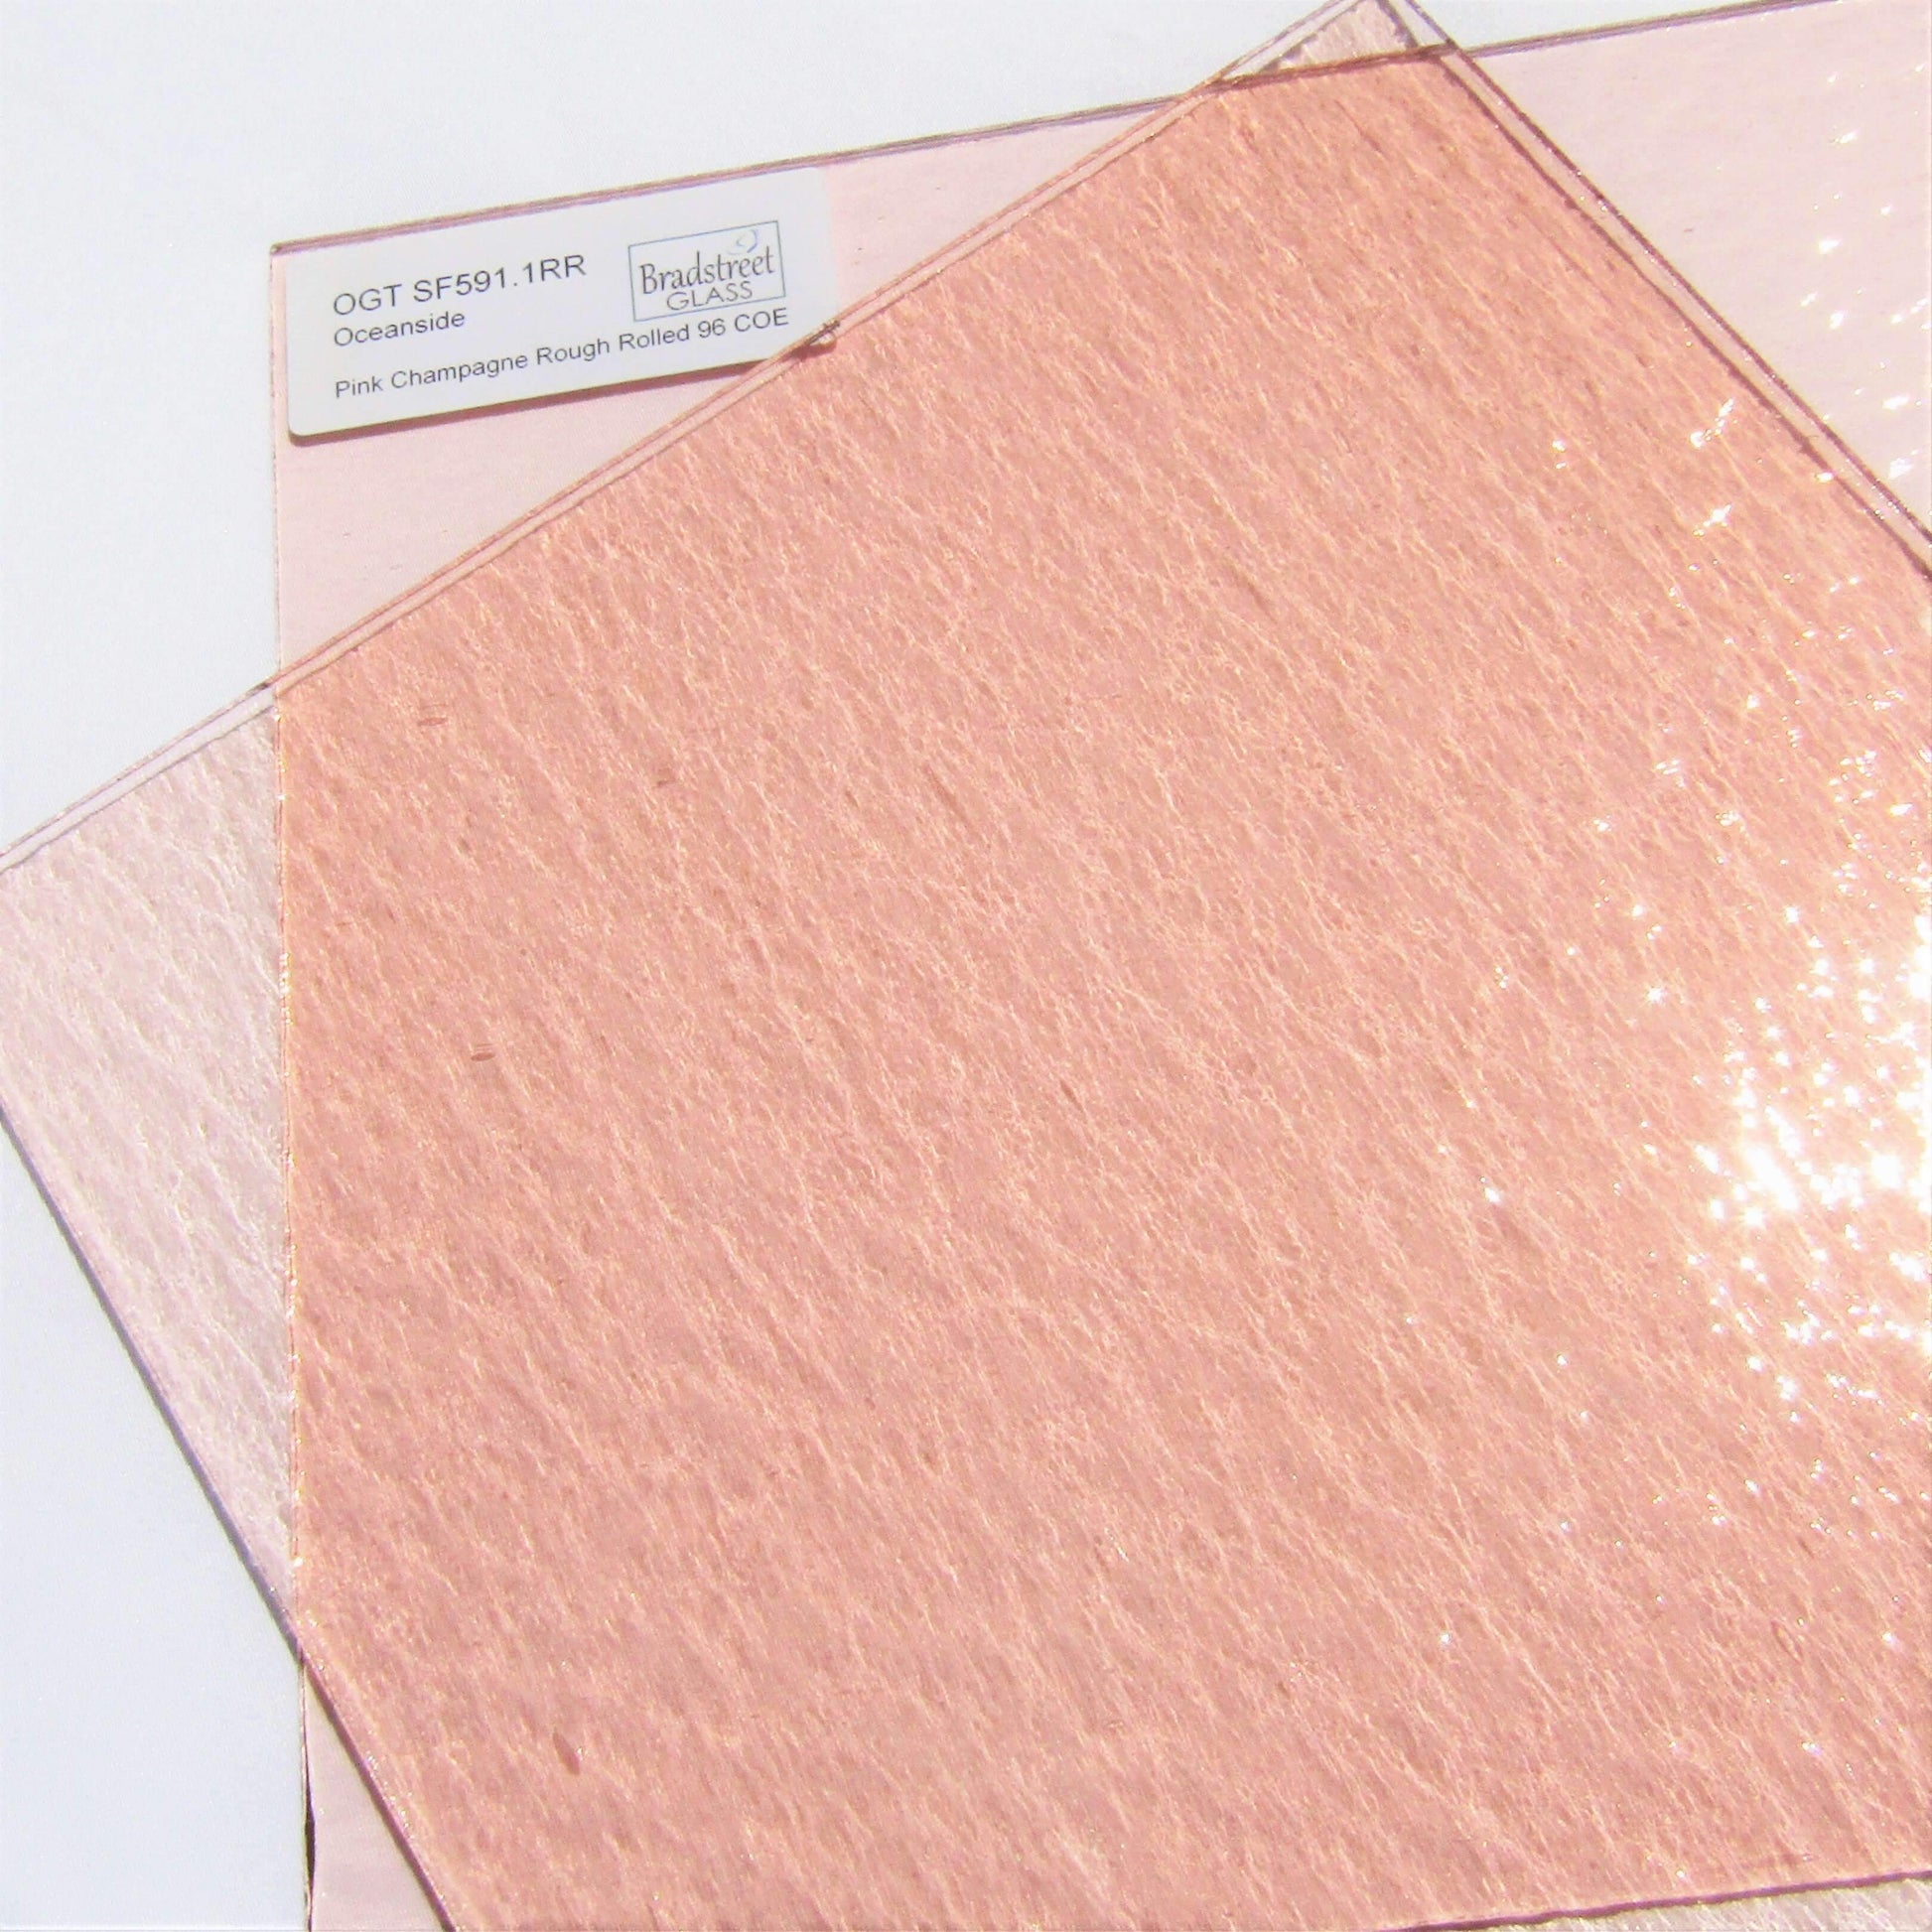 Pink Champagne Rough Rolled Stained Glass Sheet 96 COE Oceanside Fusible Spectrum SF591.1RR